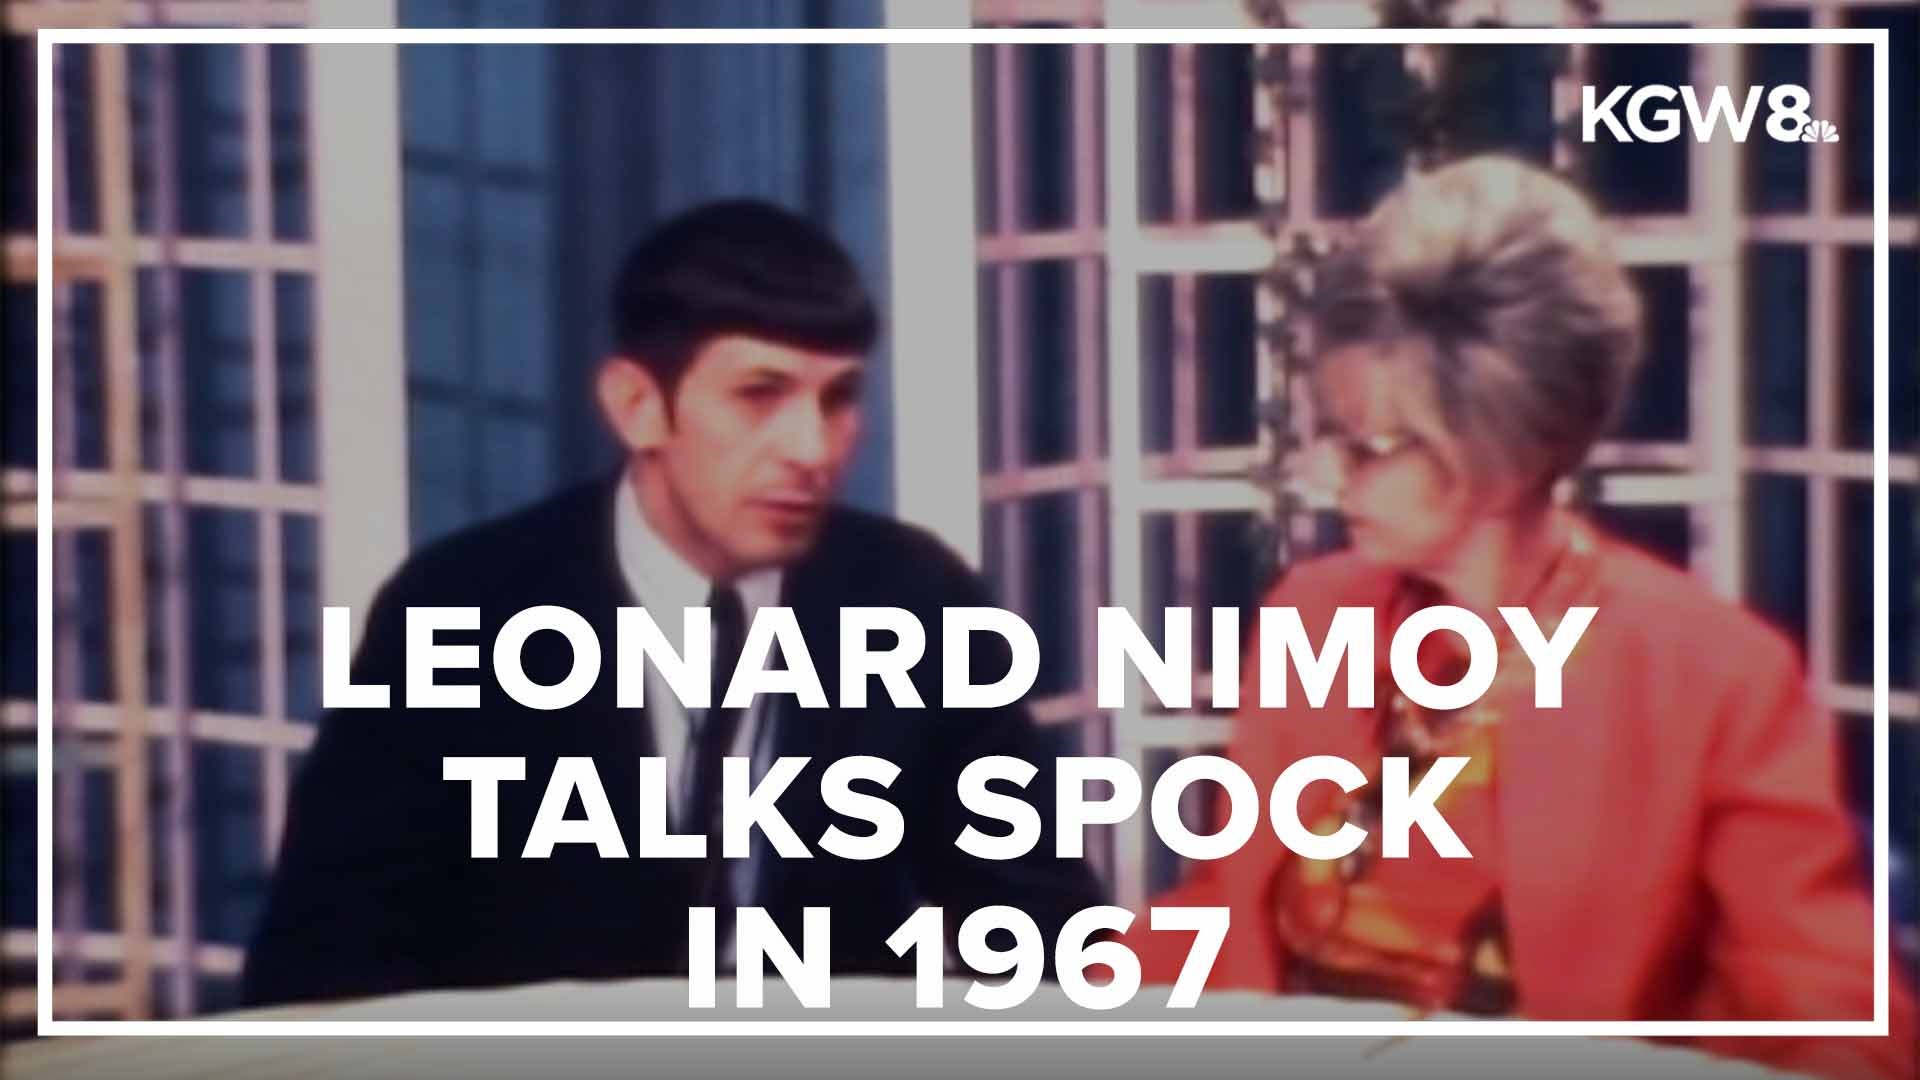 Leonard Nimoy talks about the new character he was portraying in 1967: Spock.